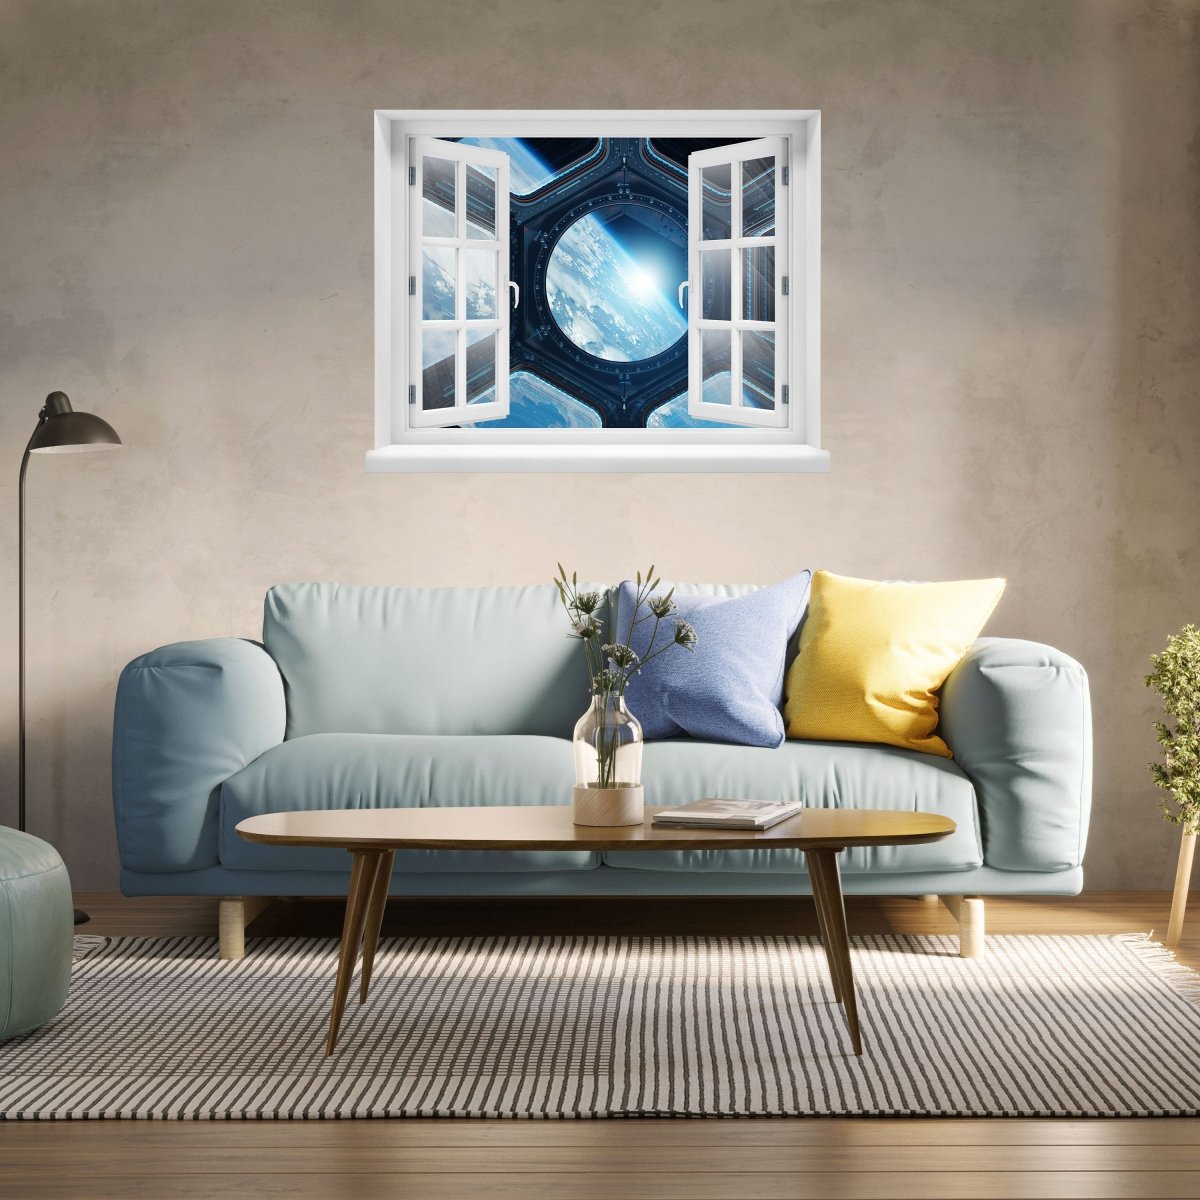 3D wall sticker view from space station, earth, universe - wall decal M1090